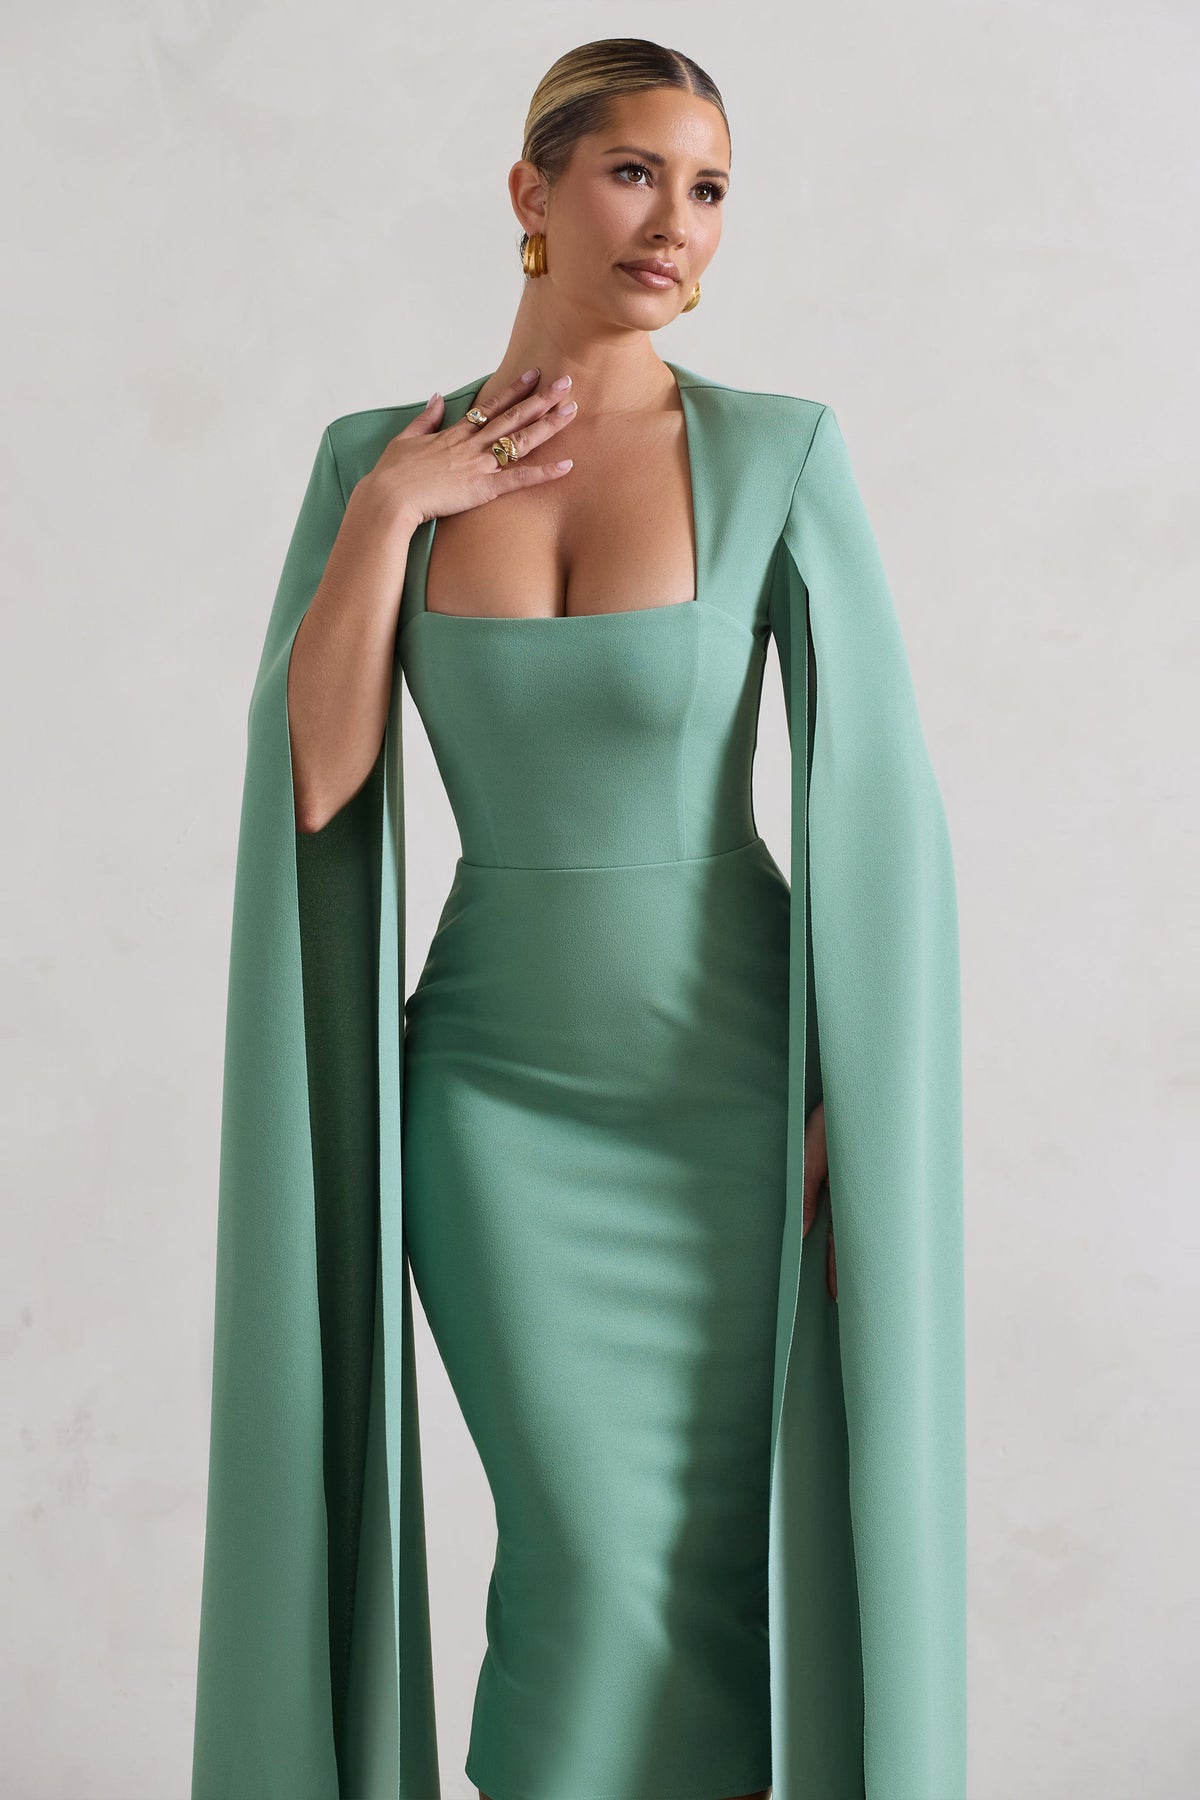 Seductress Bottle Green Square Neck Bodycon Midi Dress With Long